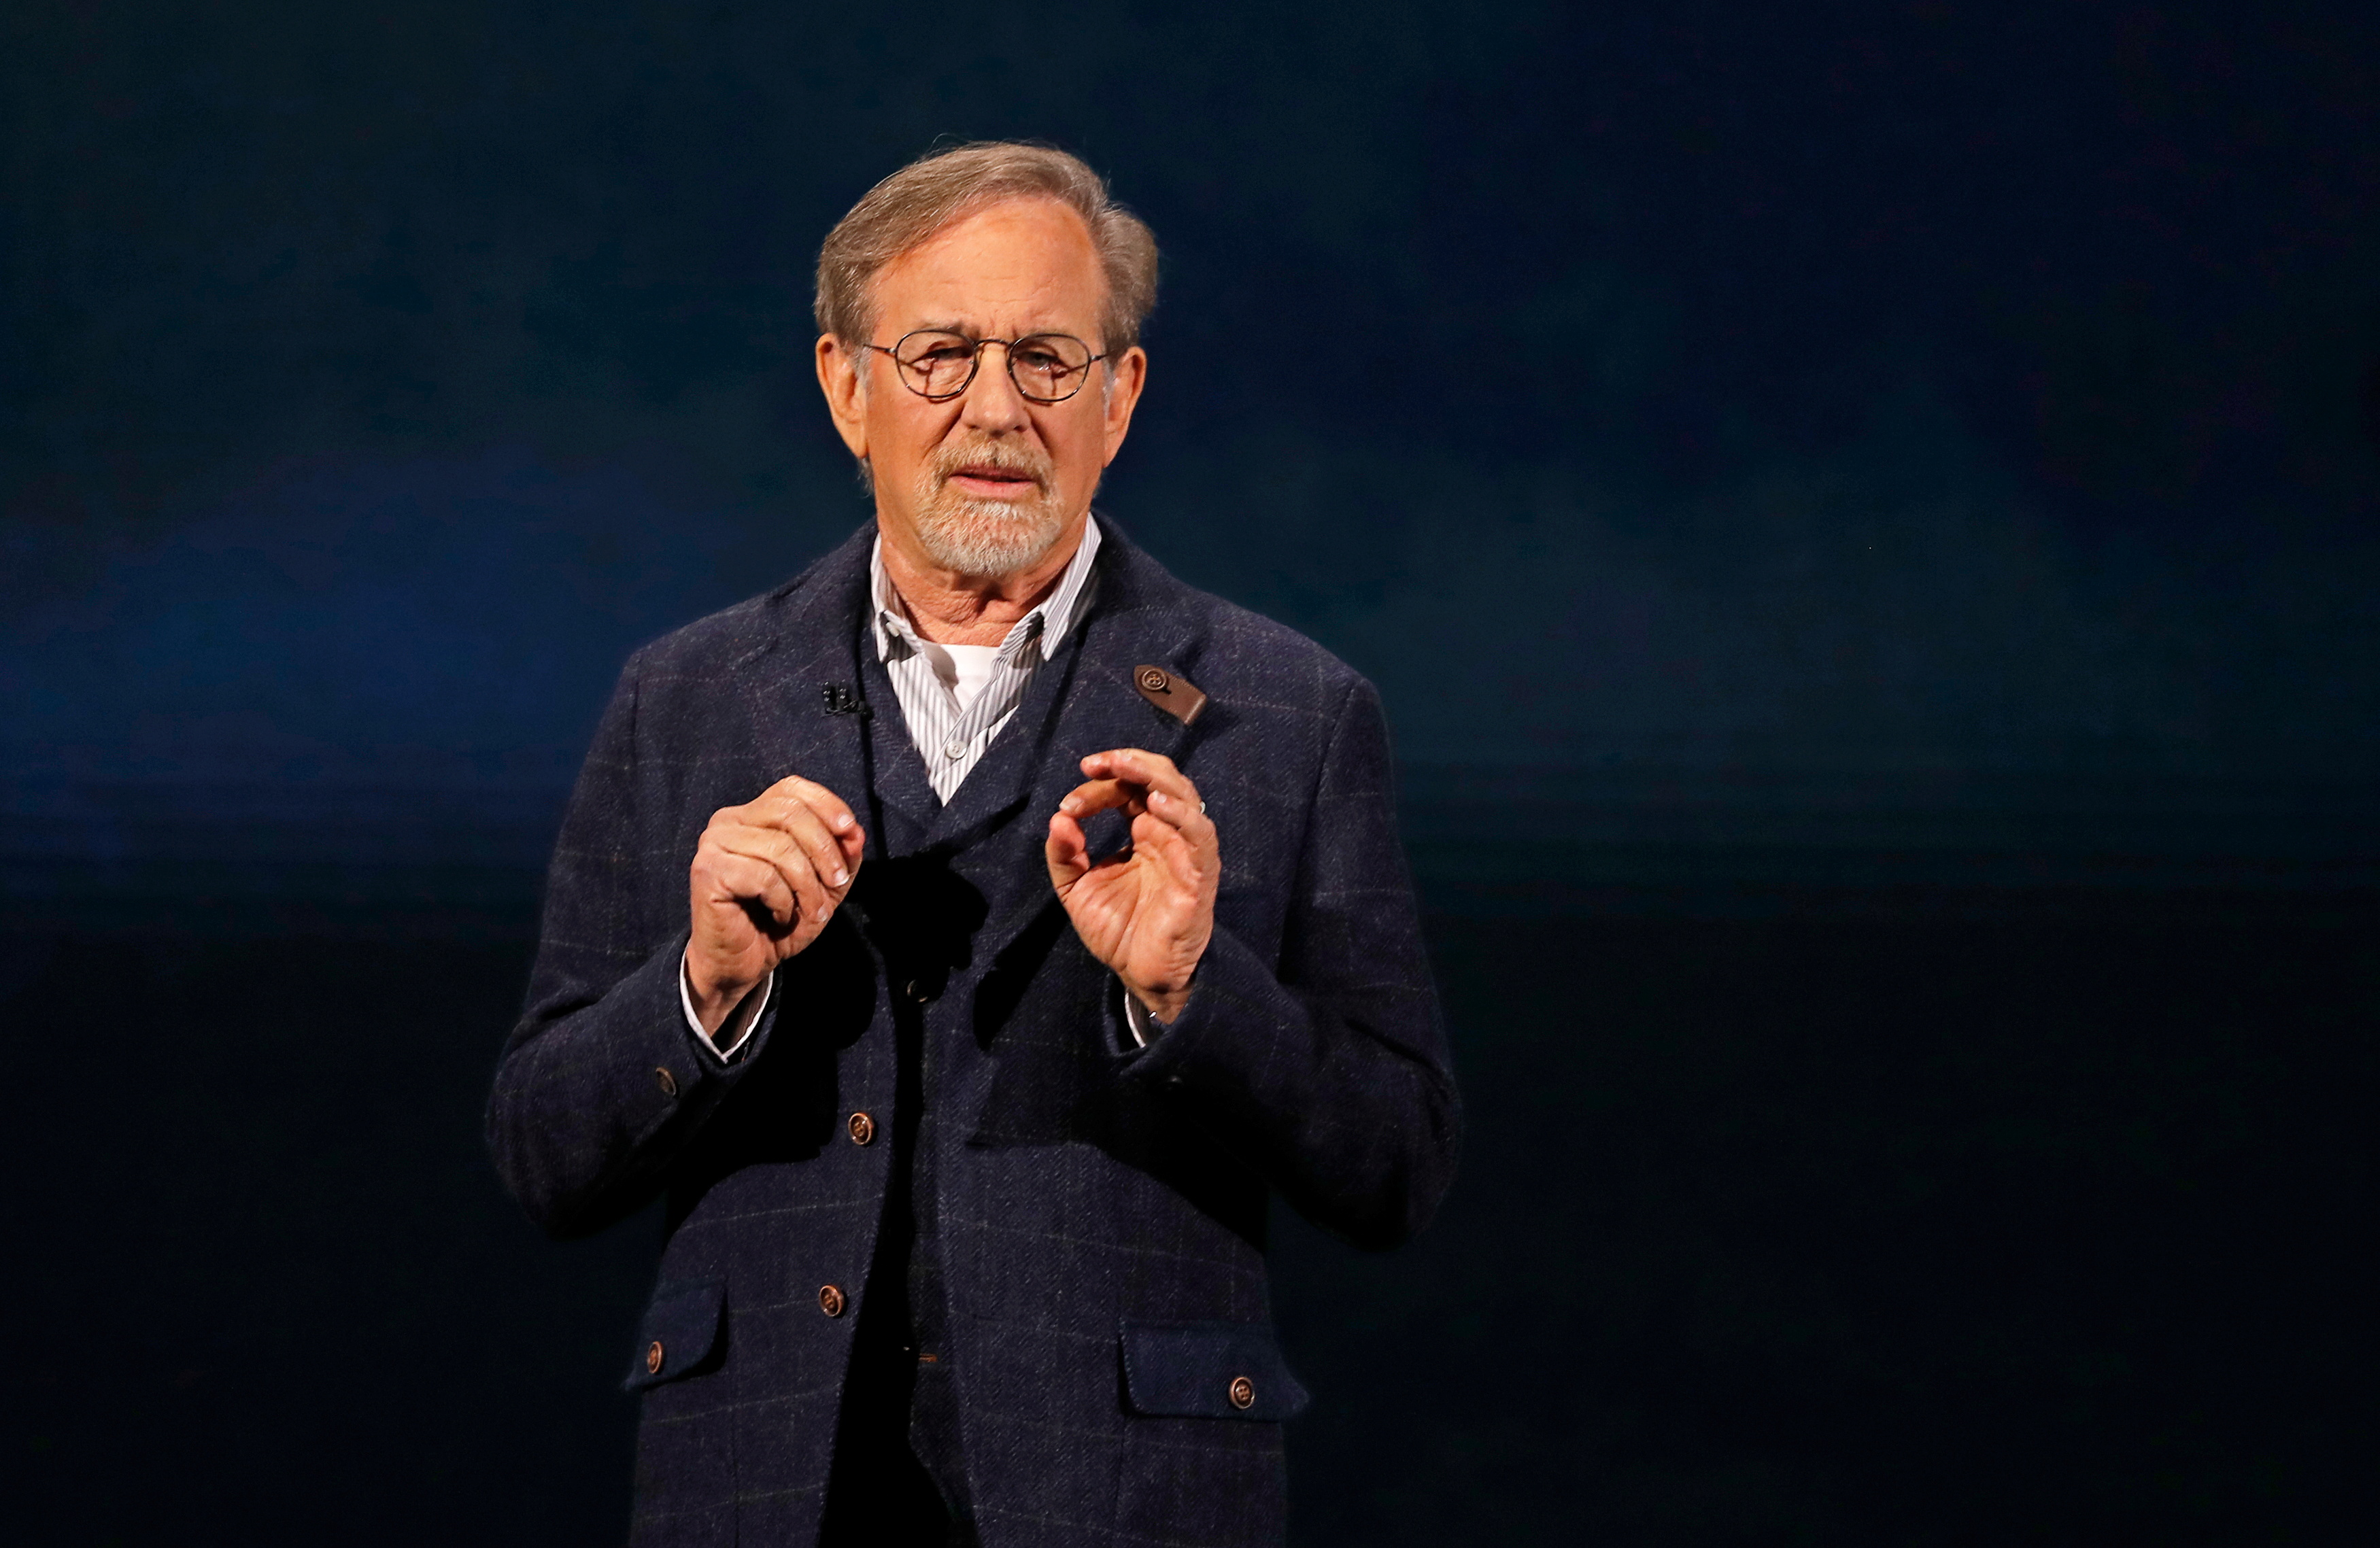 Director Steven Spielberg speaks during an Apple special event at the Steve Jobs Theater in Cupertino